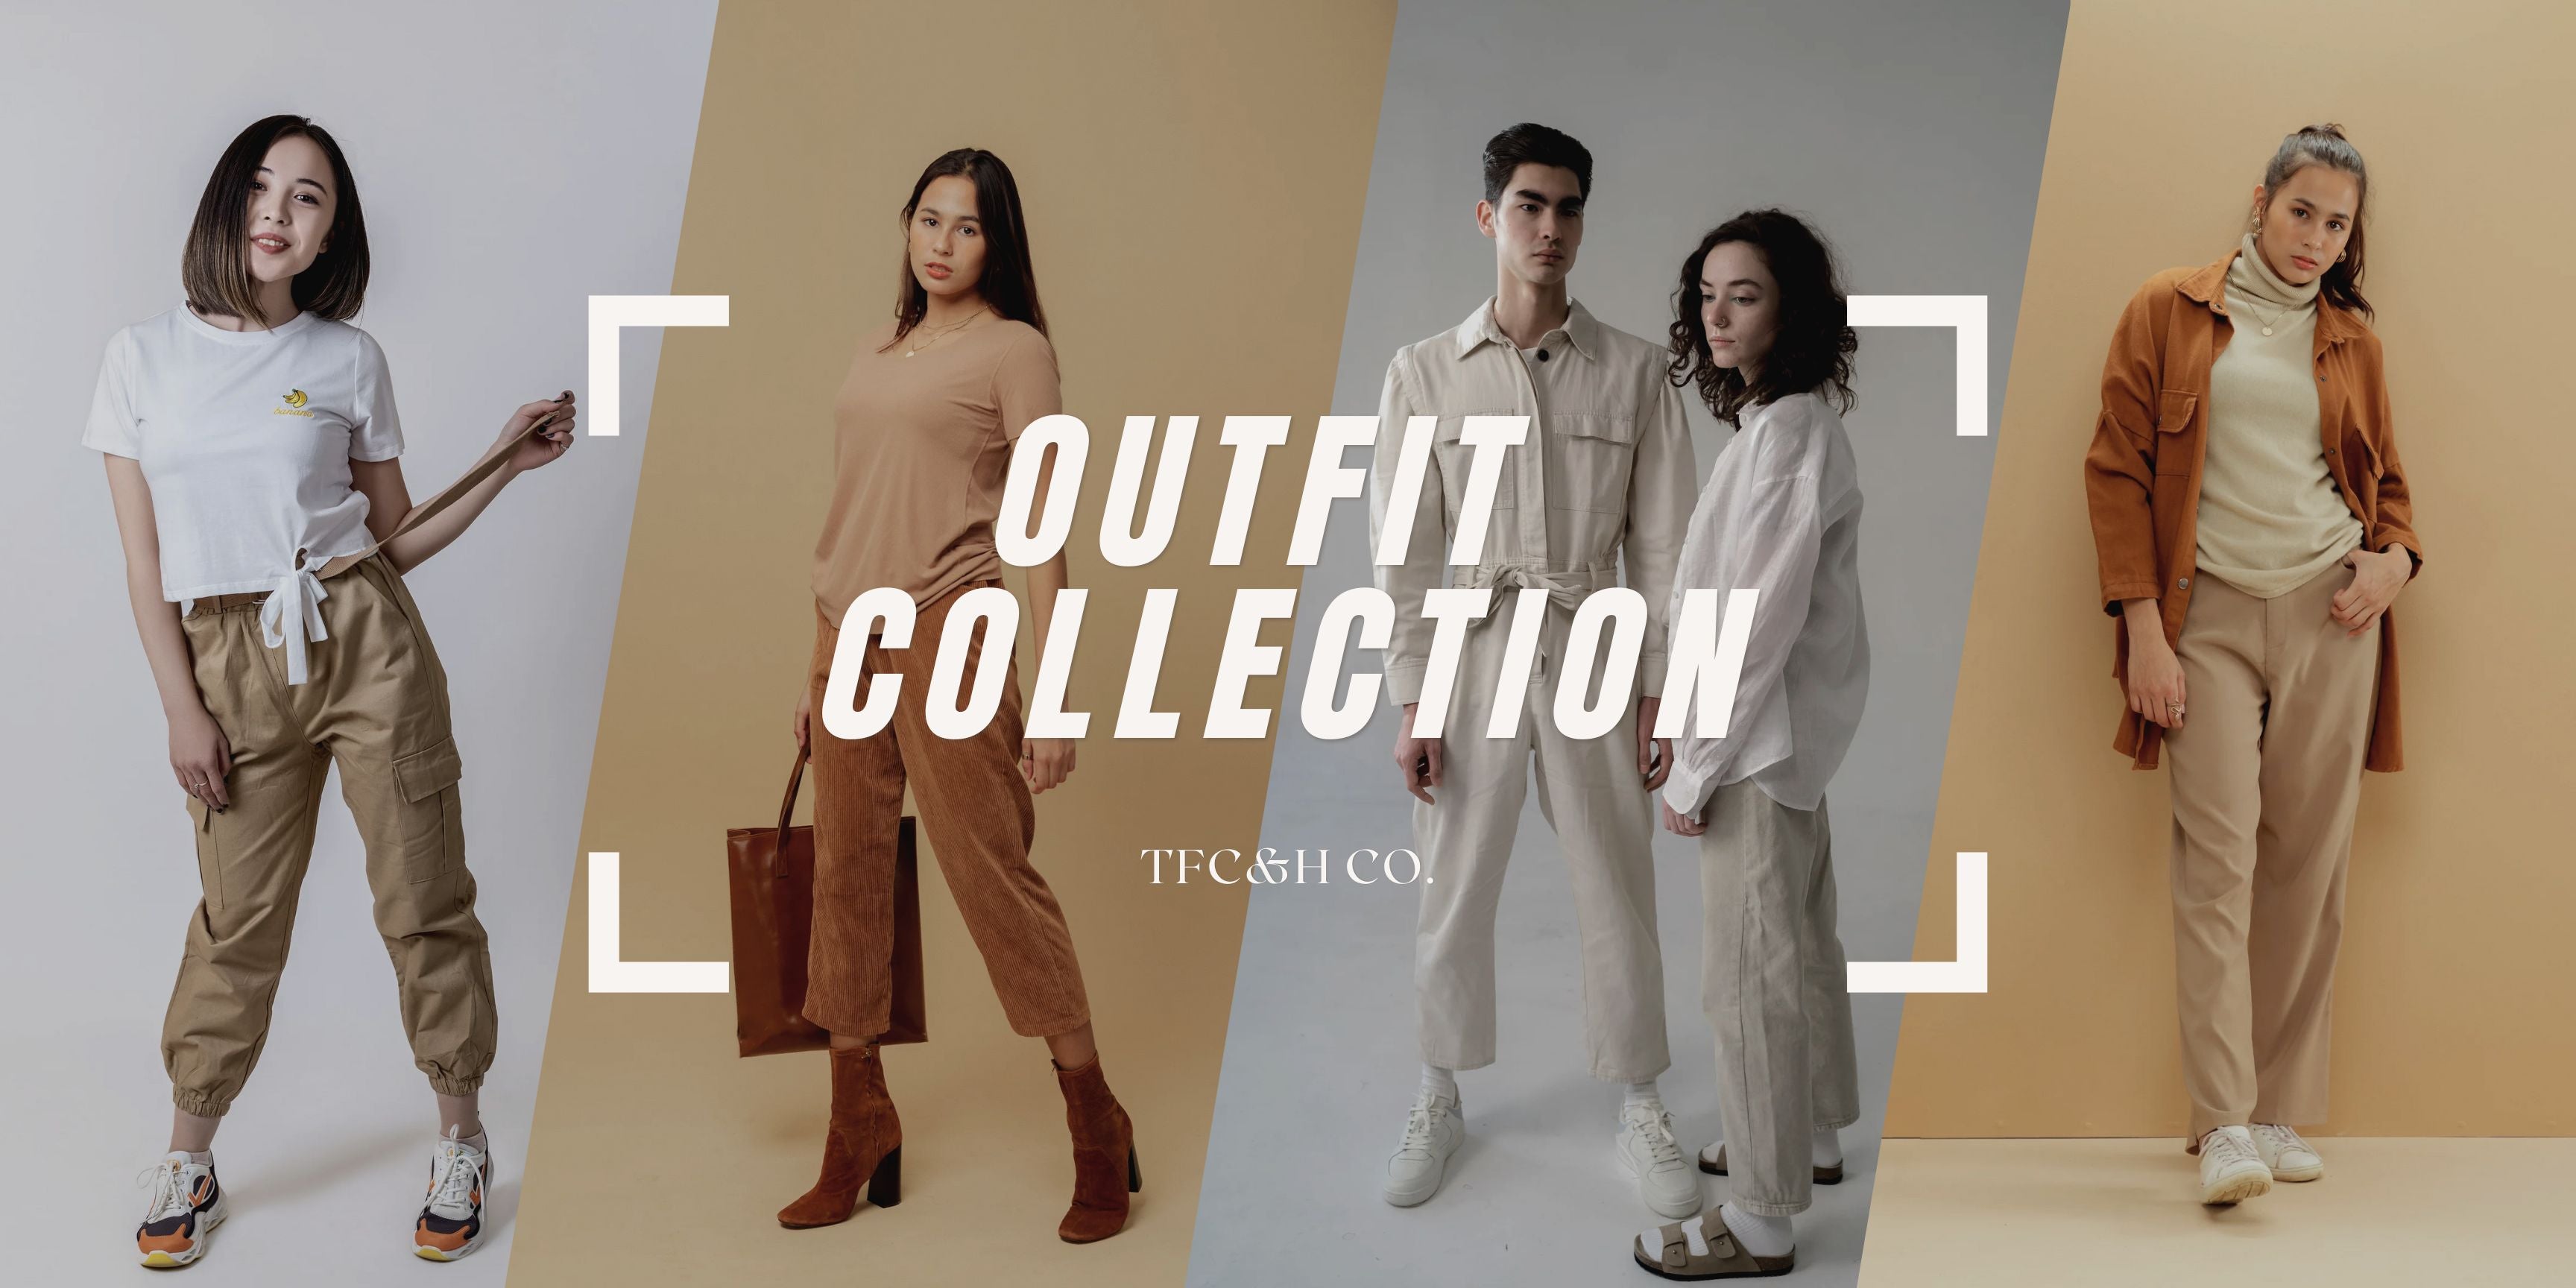 Are you tired of spending countless hours putting together outfits that just never seem to hit the mark? It's time to elevate your style game with the perfect outfit set that will have you looking chic and put-together in no time.